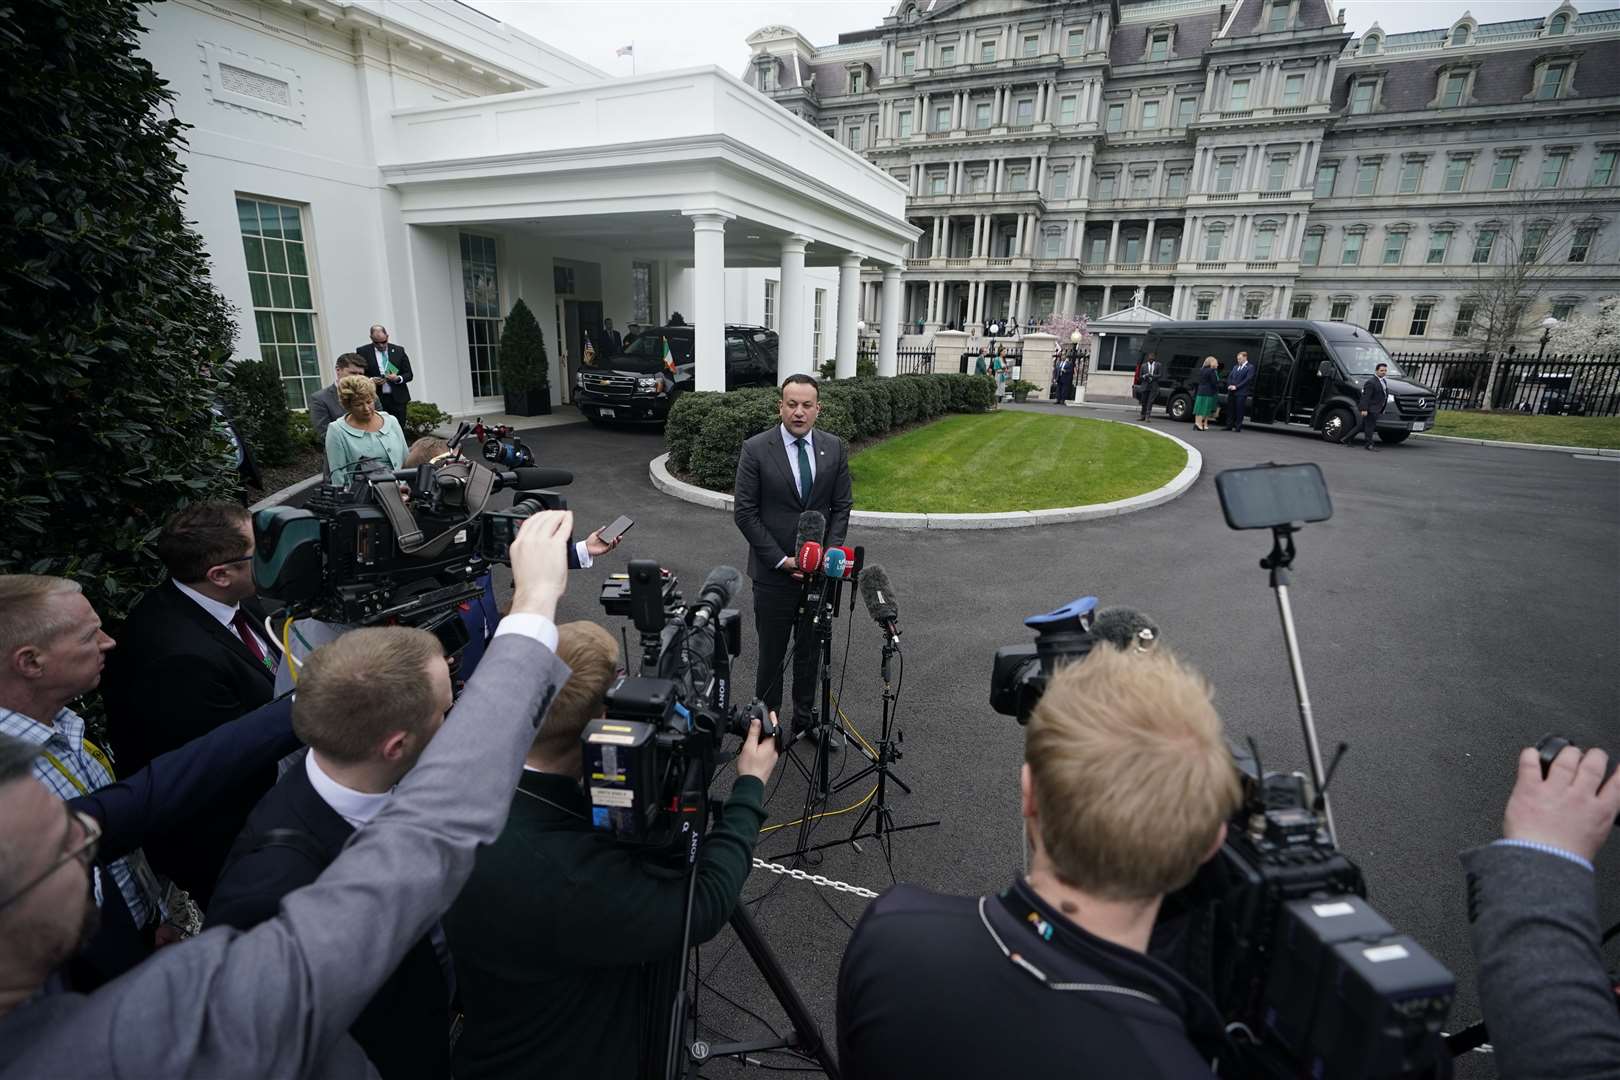 Mr Varadkar speaks to the media after his meeting with Mr Biden at the White House (Niall Carson/PA)